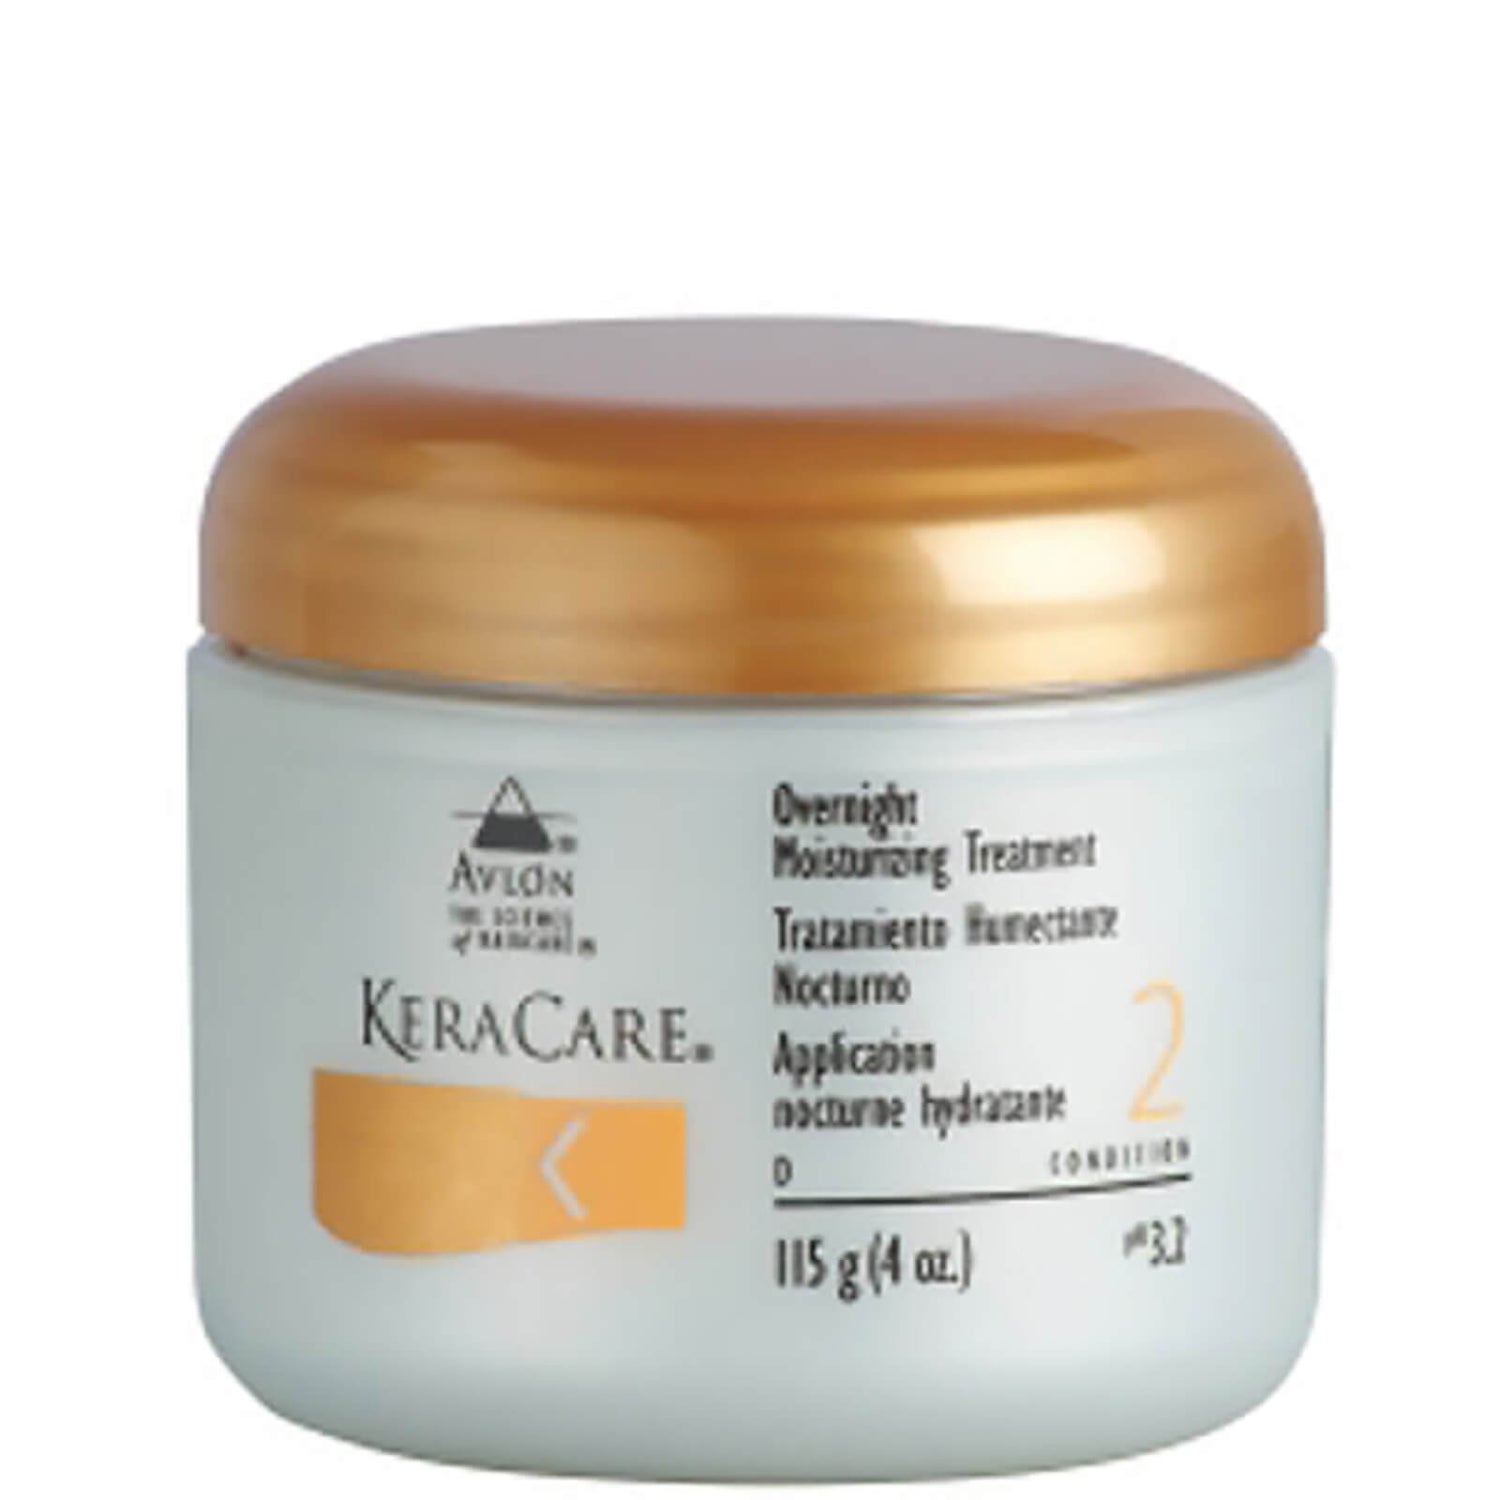 KeraCare SOIN NOCTURNE HYDRATANT (115g)